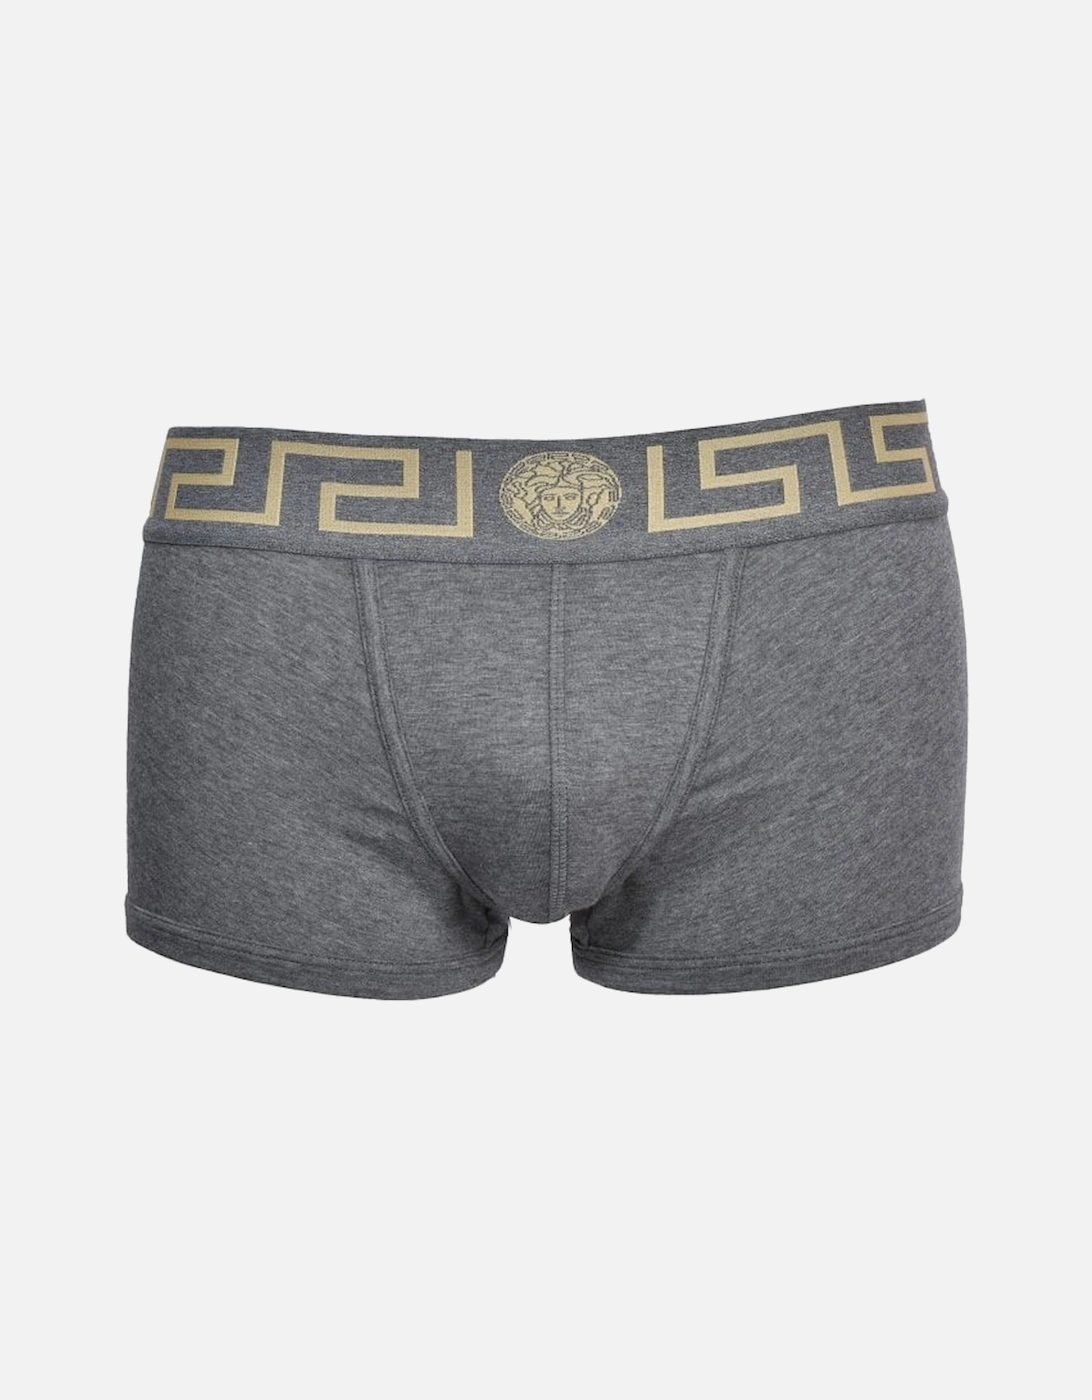 Iconic Greca Low-Rise Boxer Trunk, Grey and Gold, 6 of 5